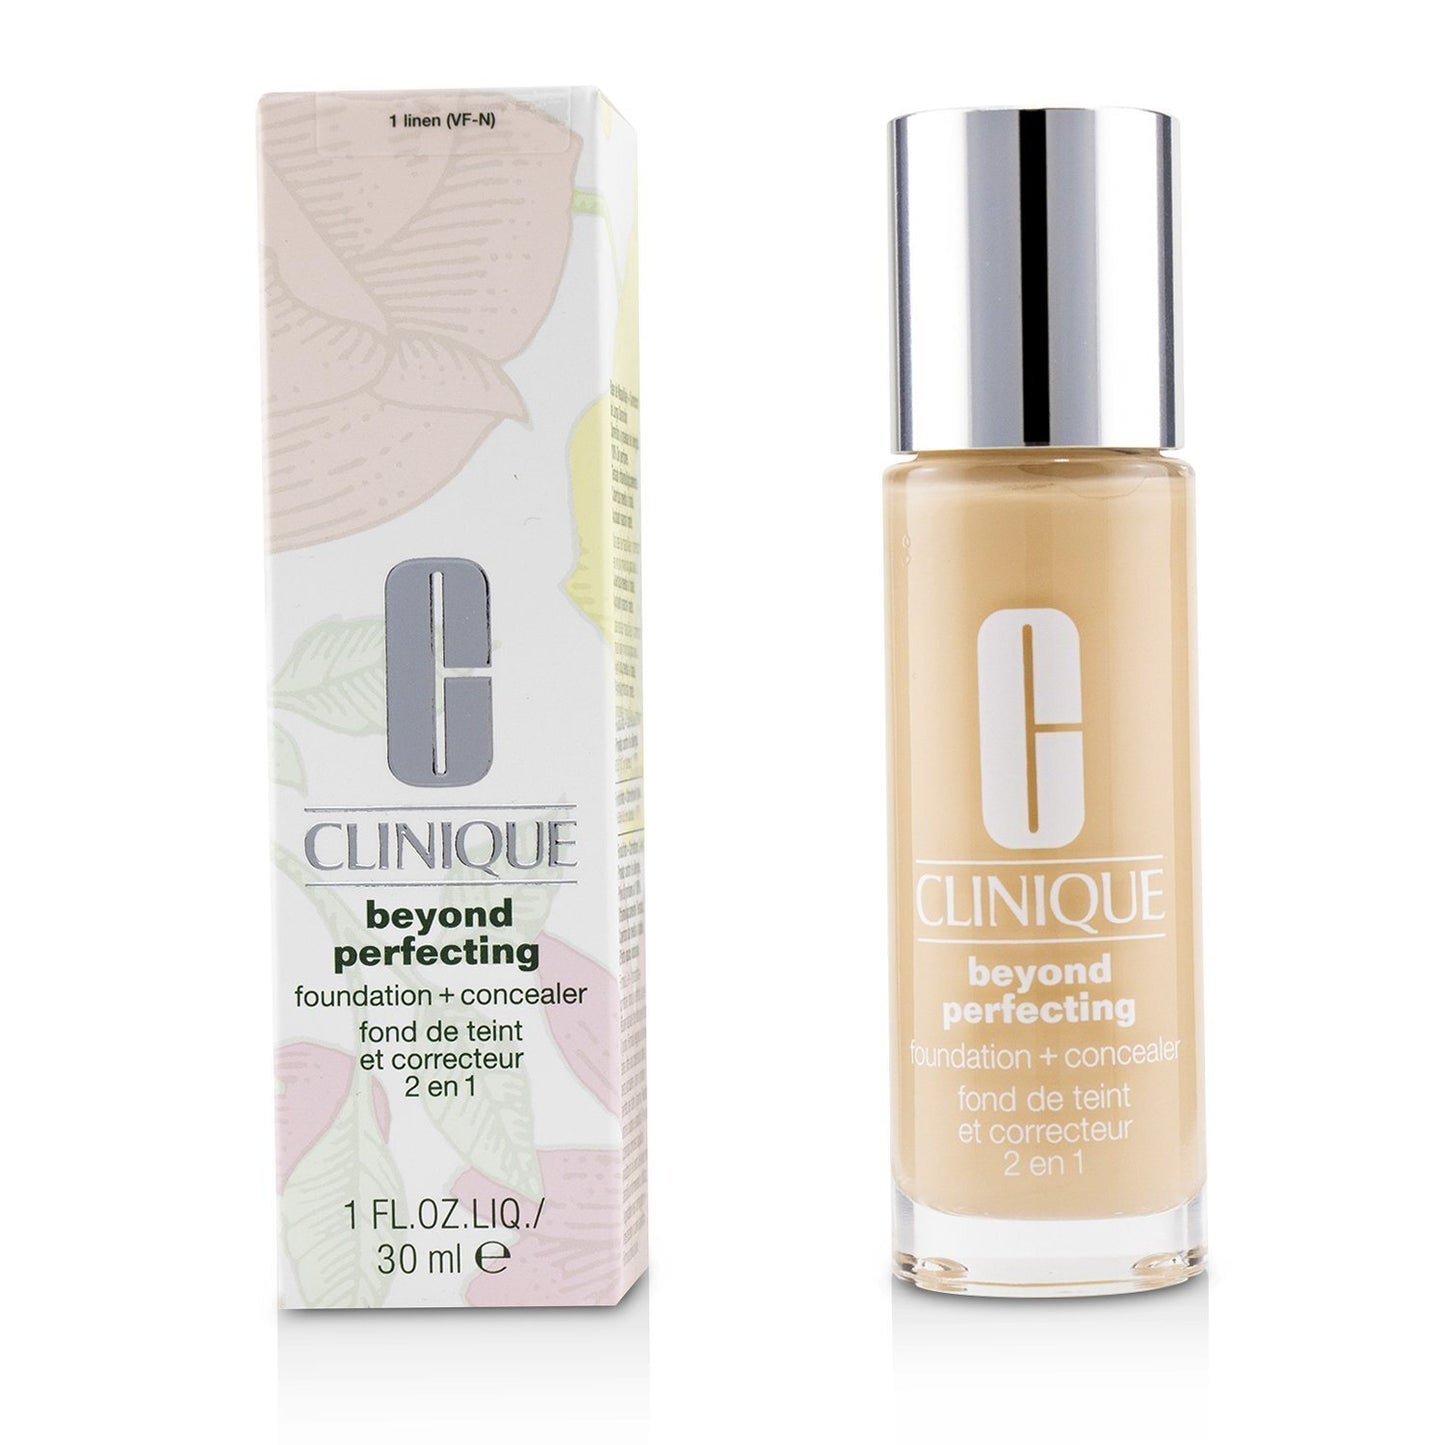 CLINIQUE - Beyond Perfecting Foundation & Concealer - # 01 Linen (VF-N) Z9FF-01 / 711849 30ml/1oz